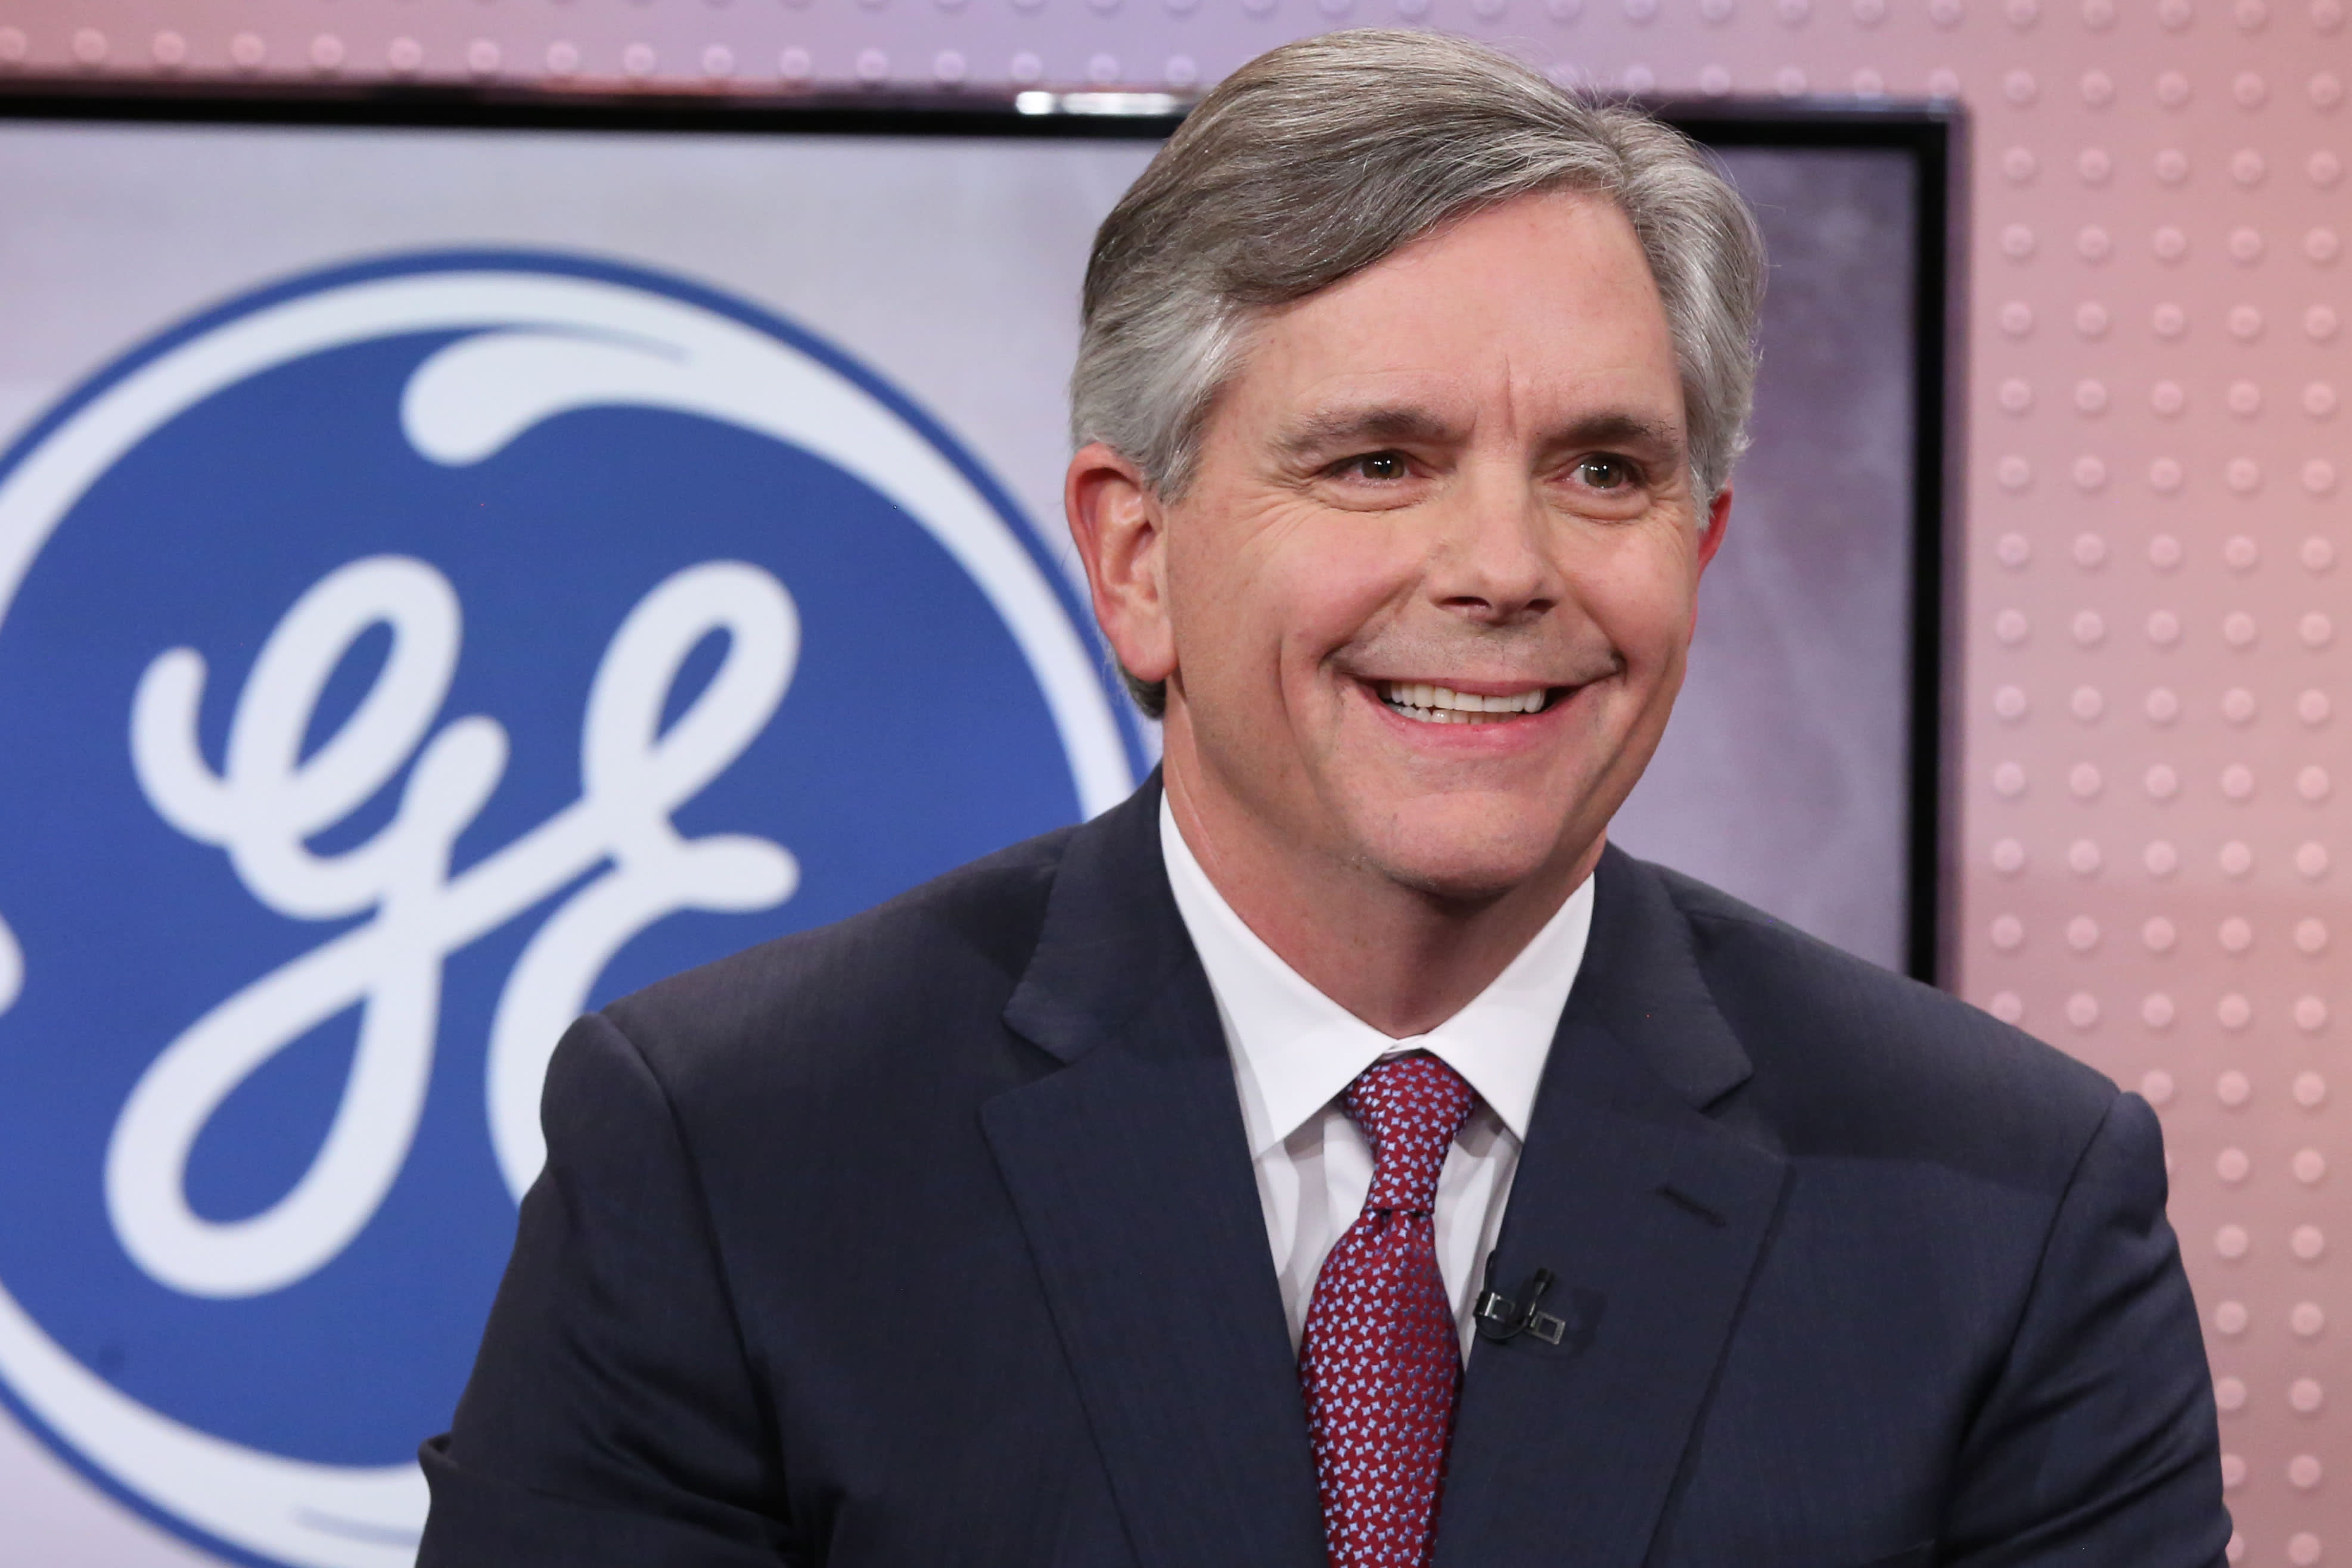 GE shares rise after tough week as optimistic analysts defend airline leasing deal